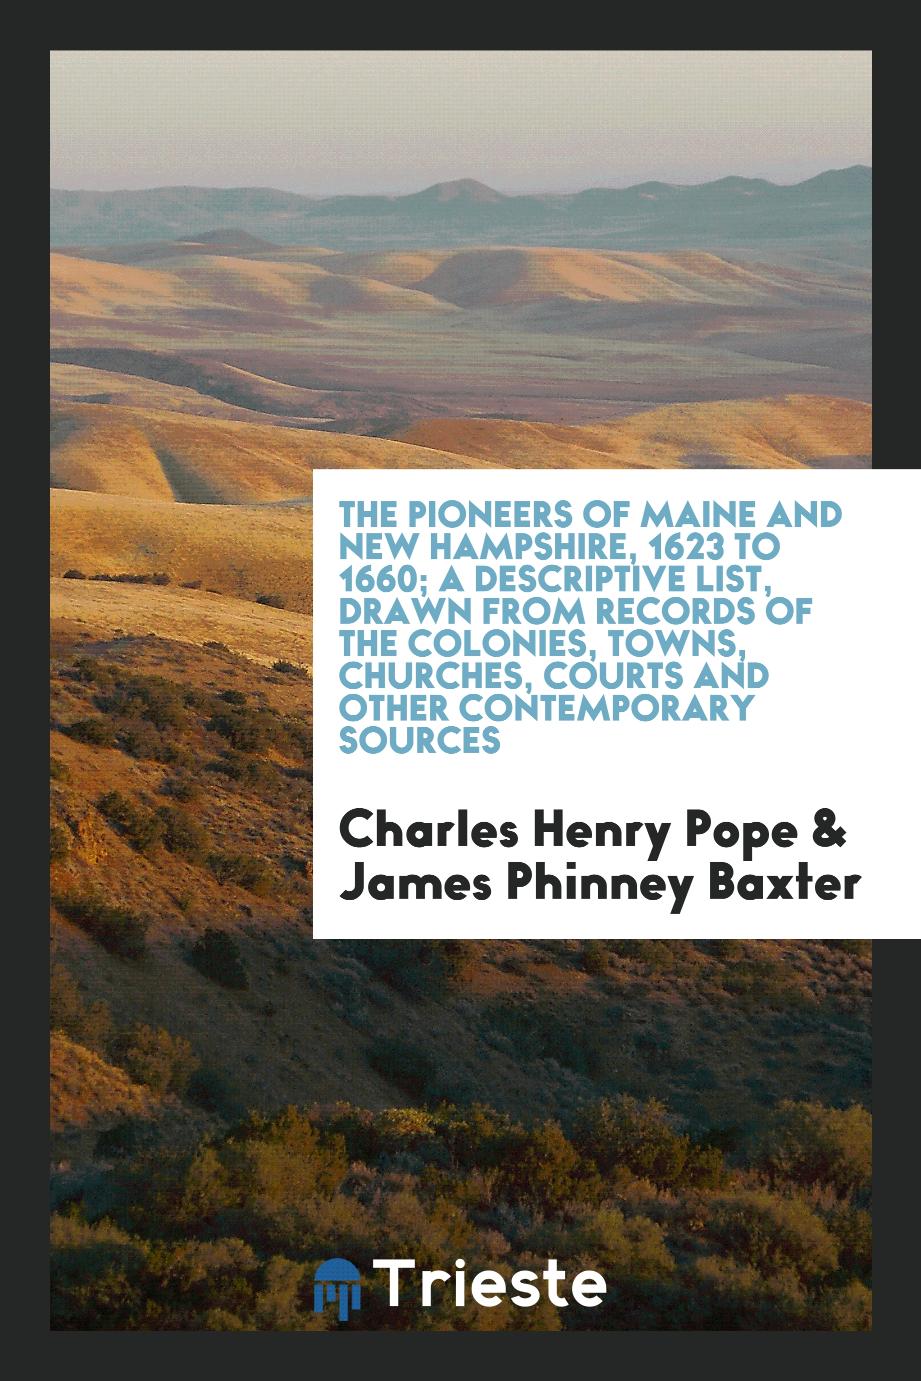 The pioneers of Maine and New Hampshire, 1623 to 1660; a descriptive list, drawn from records of the colonies, towns, churches, courts and other contemporary sources